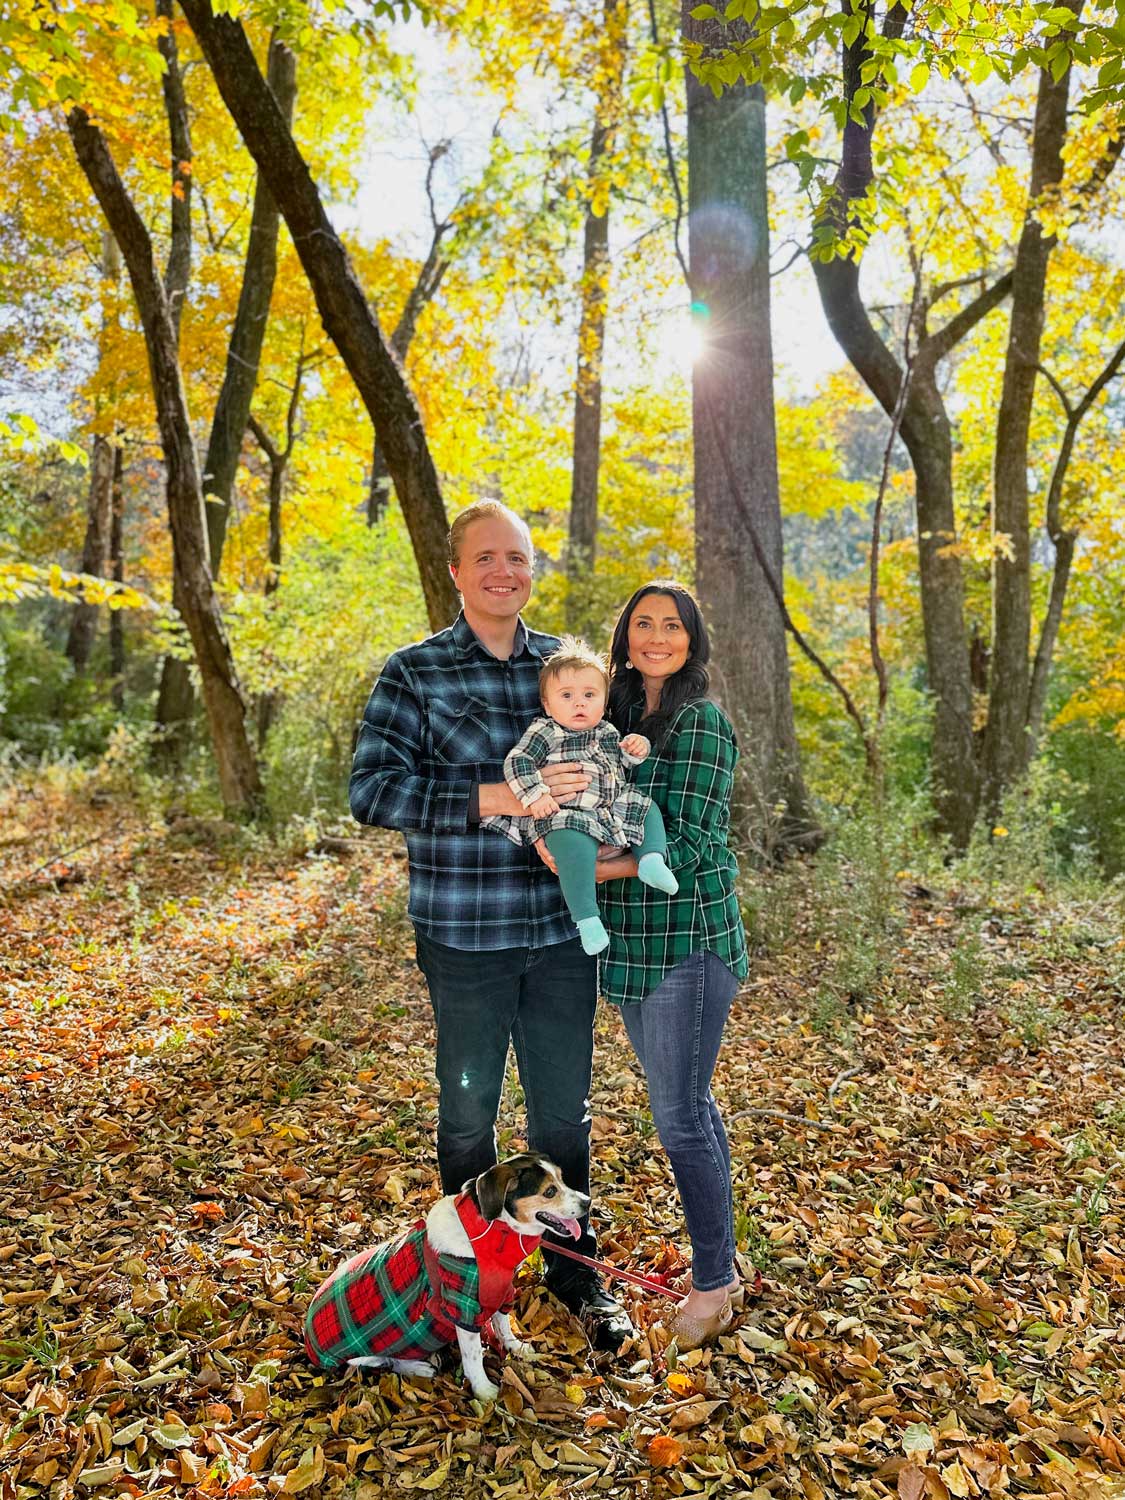 A family portrait taken with phone in a beautiful fall setting